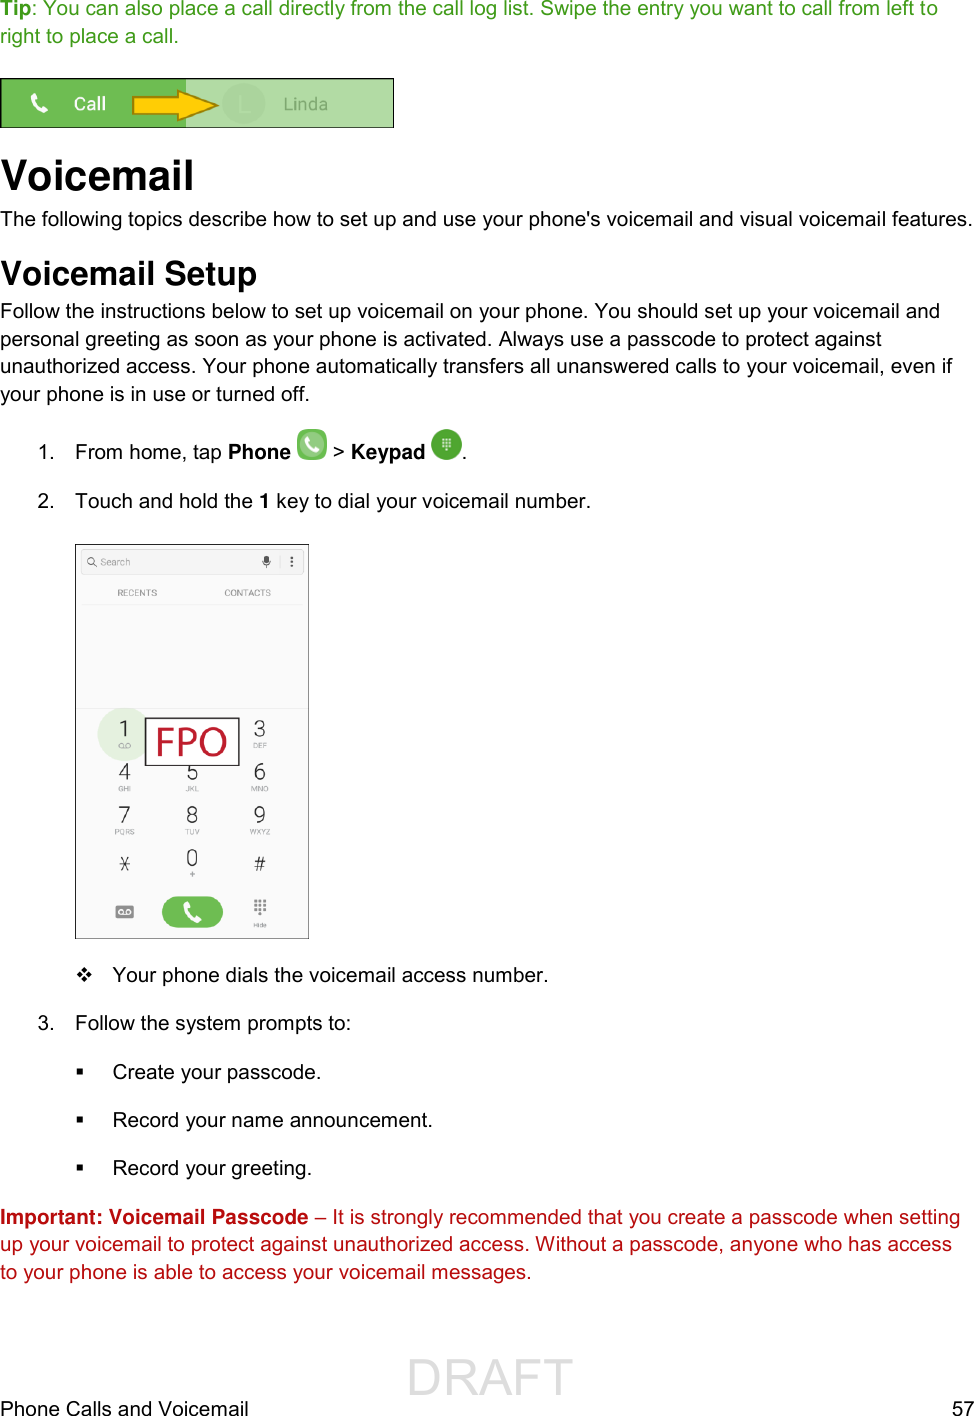                  DRAFT FOR INTERNAL USE ONLYPhone Calls and Voicemail  57 Tip: You can also place a call directly from the call log list. Swipe the entry you want to call from left to right to place a call.   Voicemail The following topics describe how to set up and use your phone&apos;s voicemail and visual voicemail features. Voicemail Setup  Follow the instructions below to set up voicemail on your phone. You should set up your voicemail and personal greeting as soon as your phone is activated. Always use a passcode to protect against unauthorized access. Your phone automatically transfers all unanswered calls to your voicemail, even if your phone is in use or turned off. 1.  From home, tap Phone   &gt; Keypad  . 2.  Touch and hold the 1 key to dial your voicemail number.     Your phone dials the voicemail access number. 3.  Follow the system prompts to:   Create your passcode.   Record your name announcement.   Record your greeting. Important: Voicemail Passcode – It is strongly recommended that you create a passcode when setting up your voicemail to protect against unauthorized access. Without a passcode, anyone who has access to your phone is able to access your voicemail messages. 